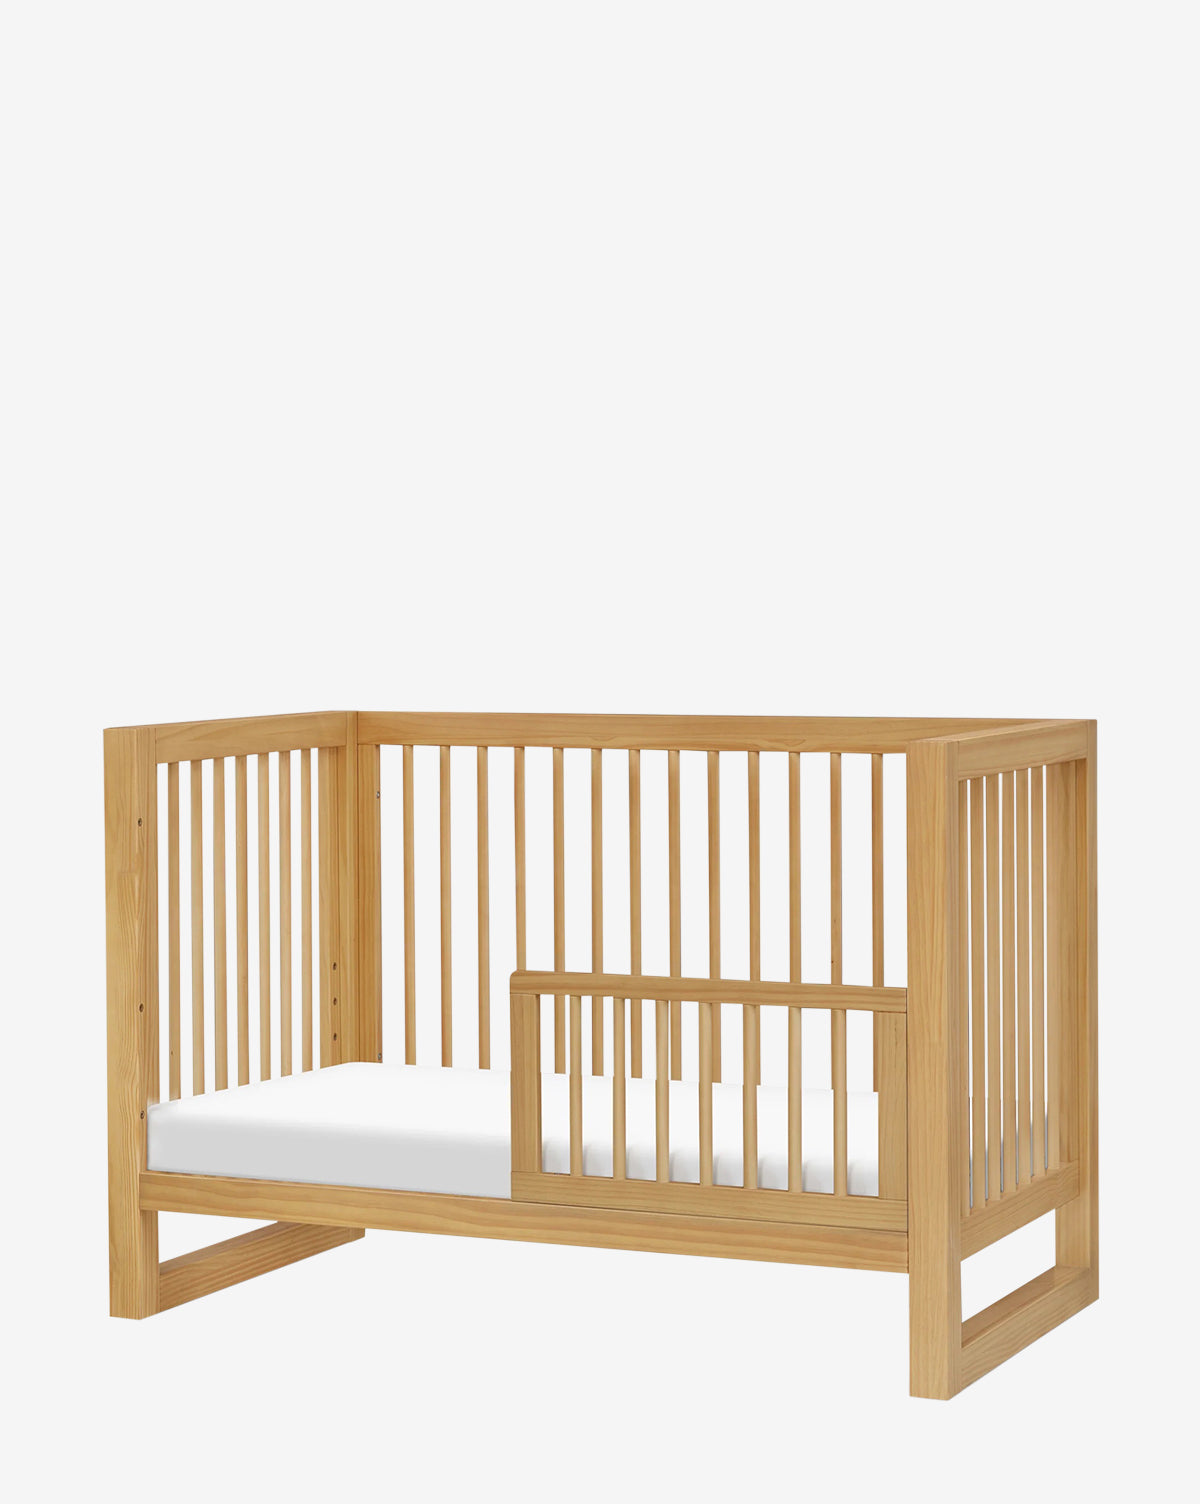 Million Dollar Baby, Nantucket 3-in-1 Convertible Crib with Toddler Bed Conversion Kit